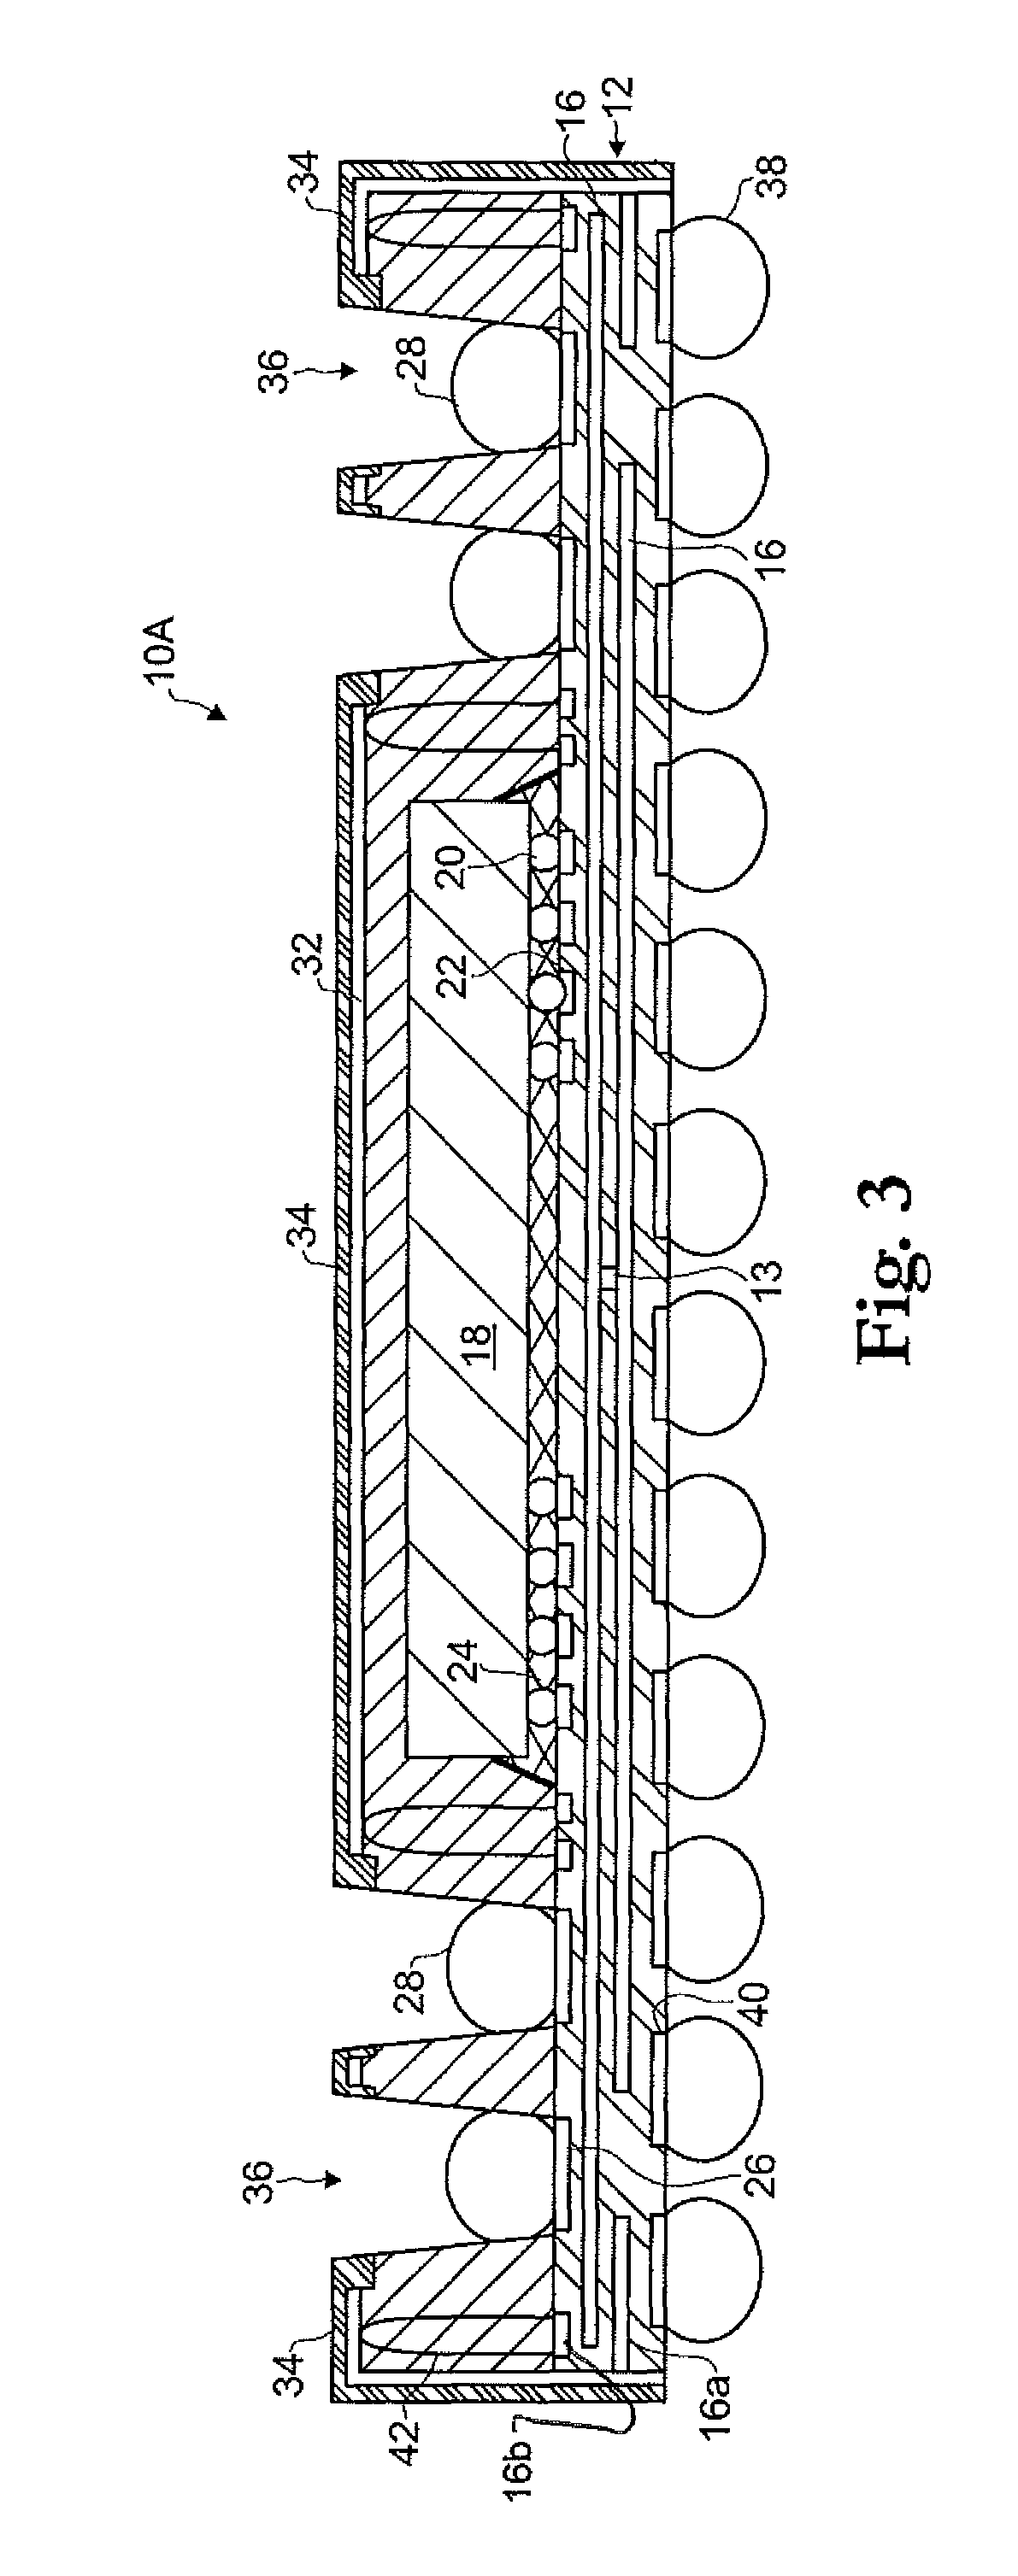 System and method for shielding of package on package (PoP) assemblies